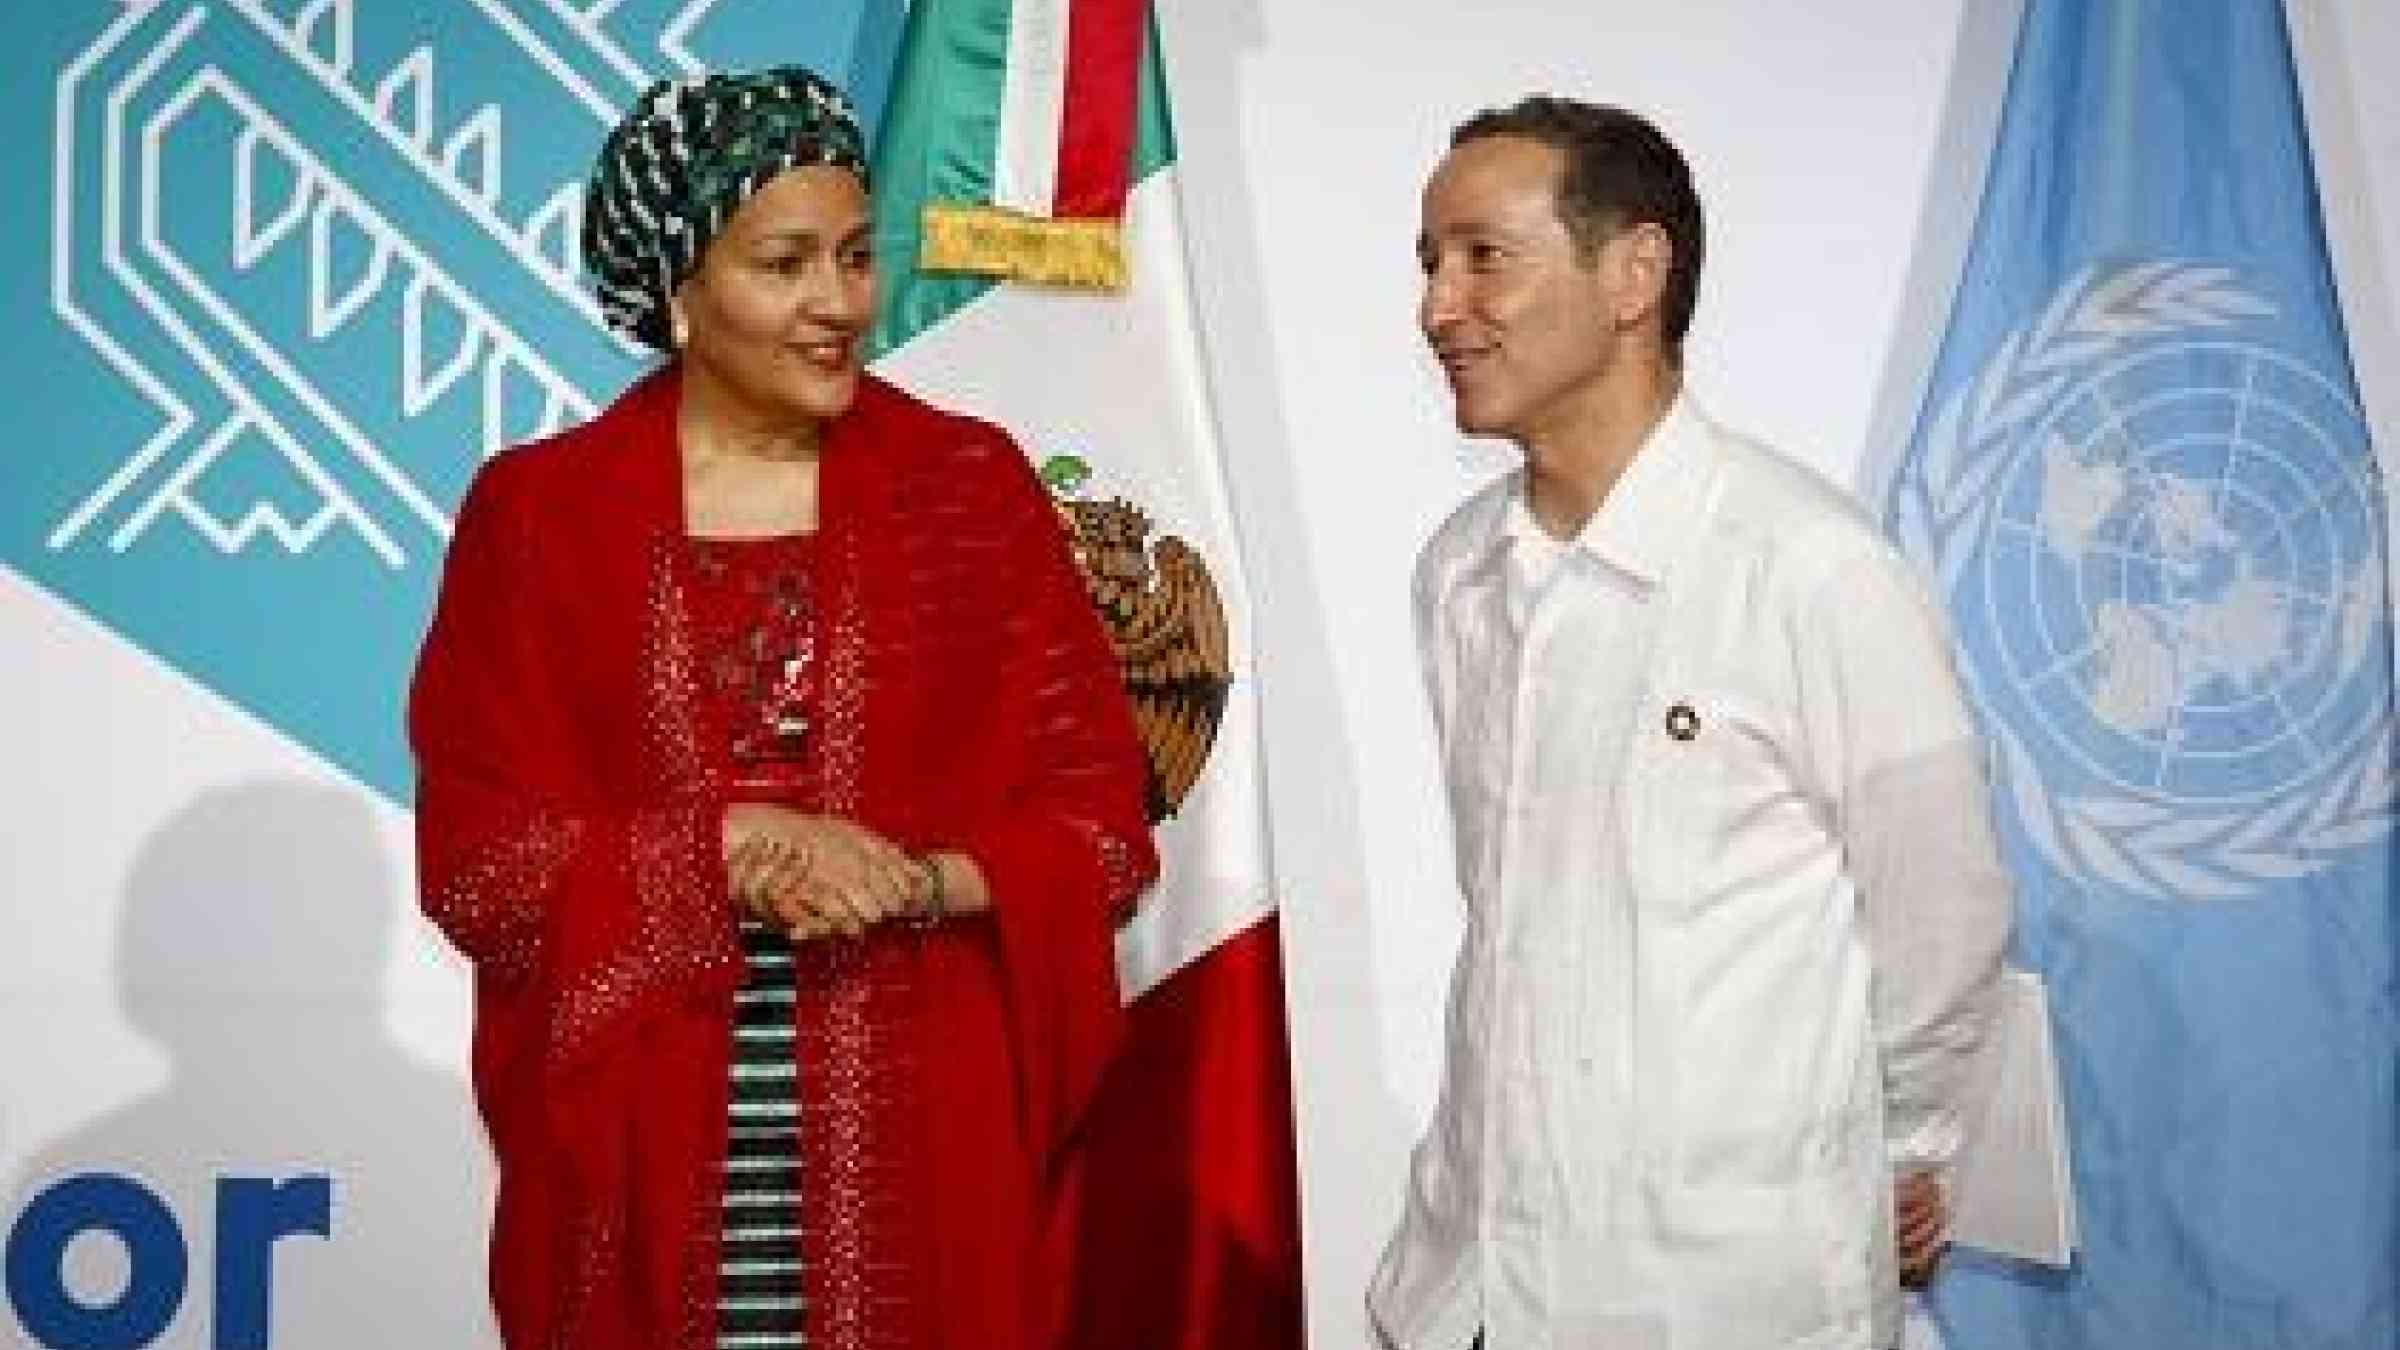 The UN Deputy Secretary-General, Ms. Amina Mohammed, with UNISDR chief and Secretary-General's Special Representative for Disaster Risk Reduction, Mr. Robert Glasser